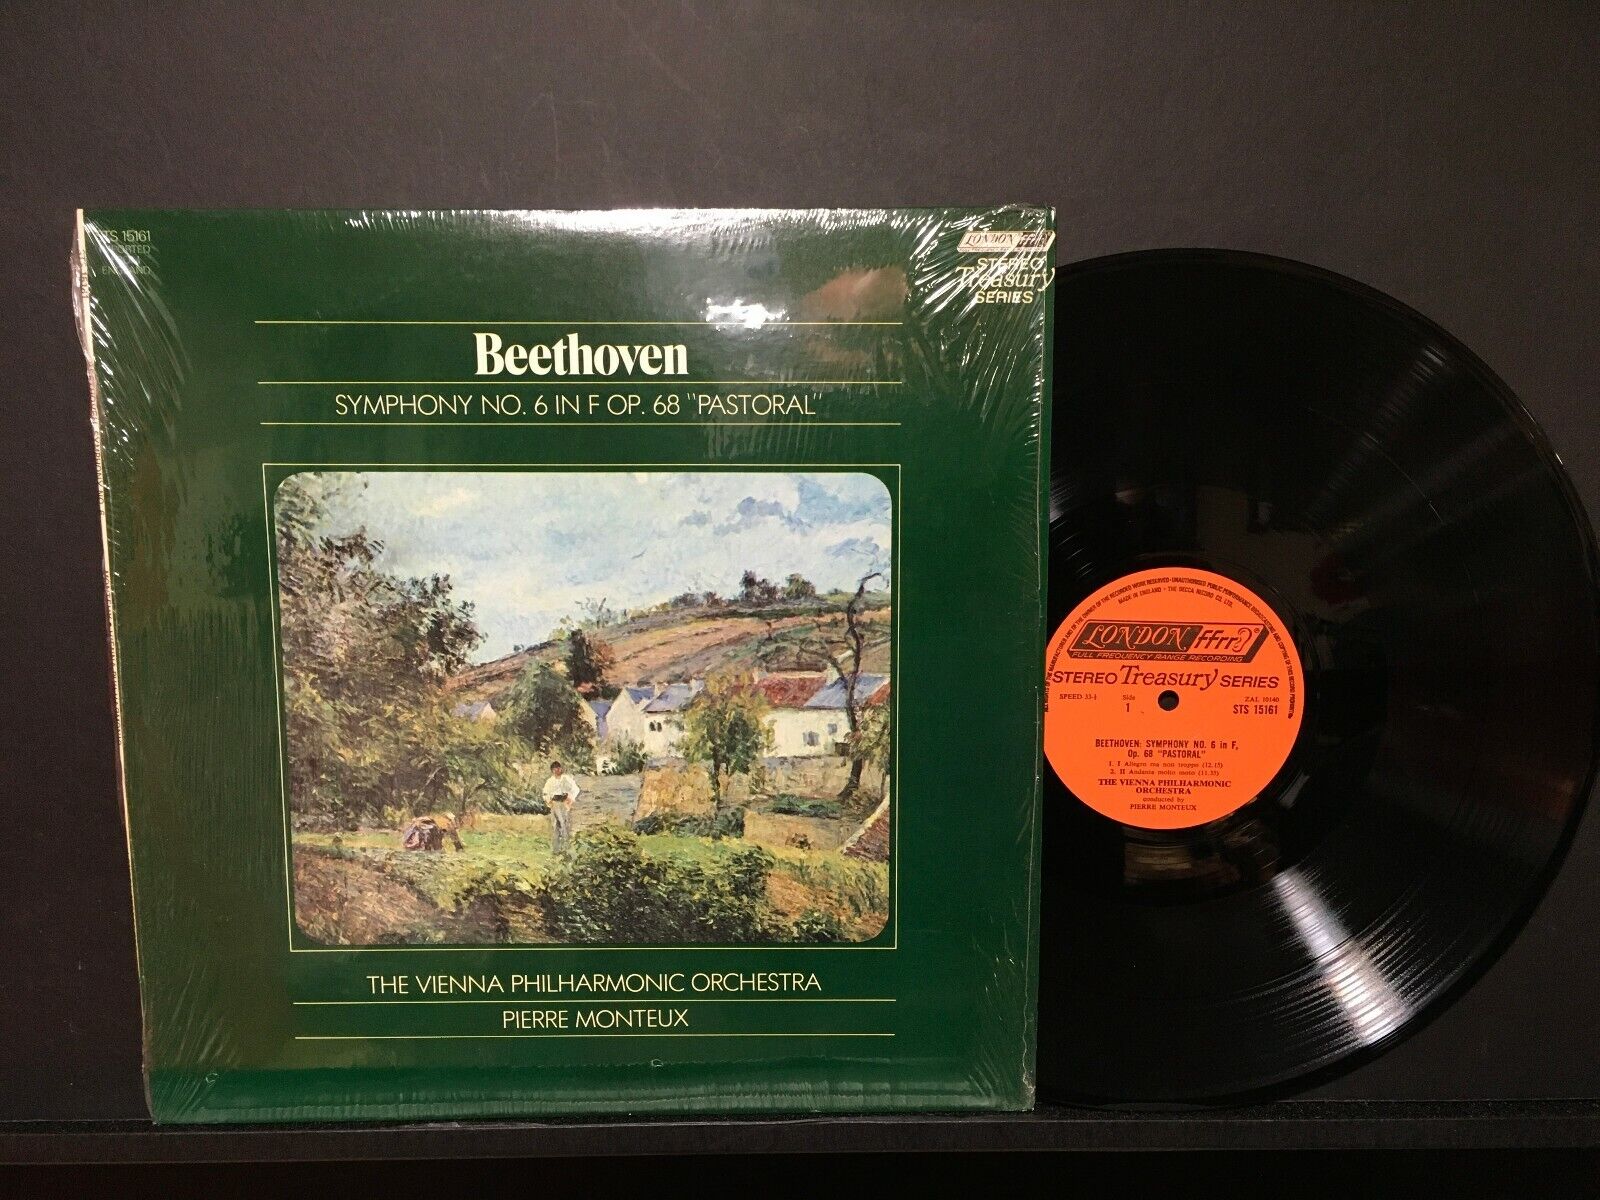 Vienna Philharmonic Orchestra 12in Lp " Beethoven "